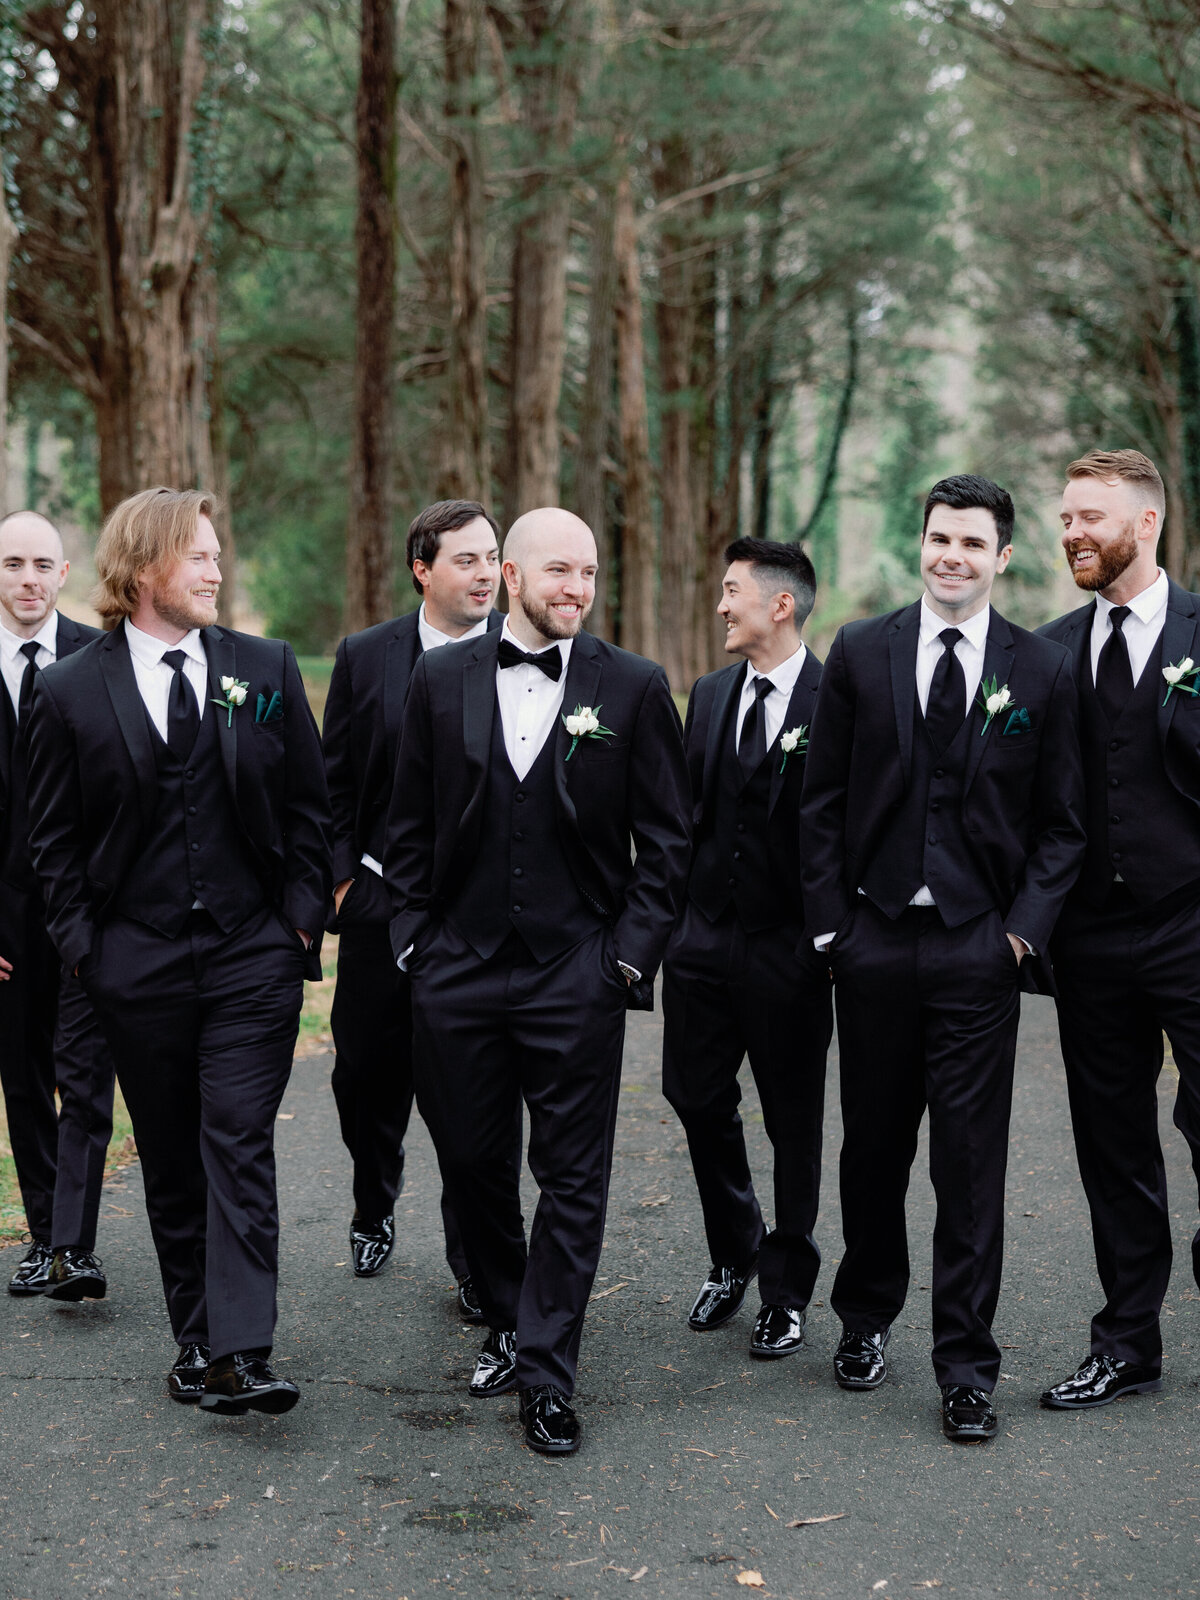 A groom walking with his groomsmen as they laugh and talk with one another